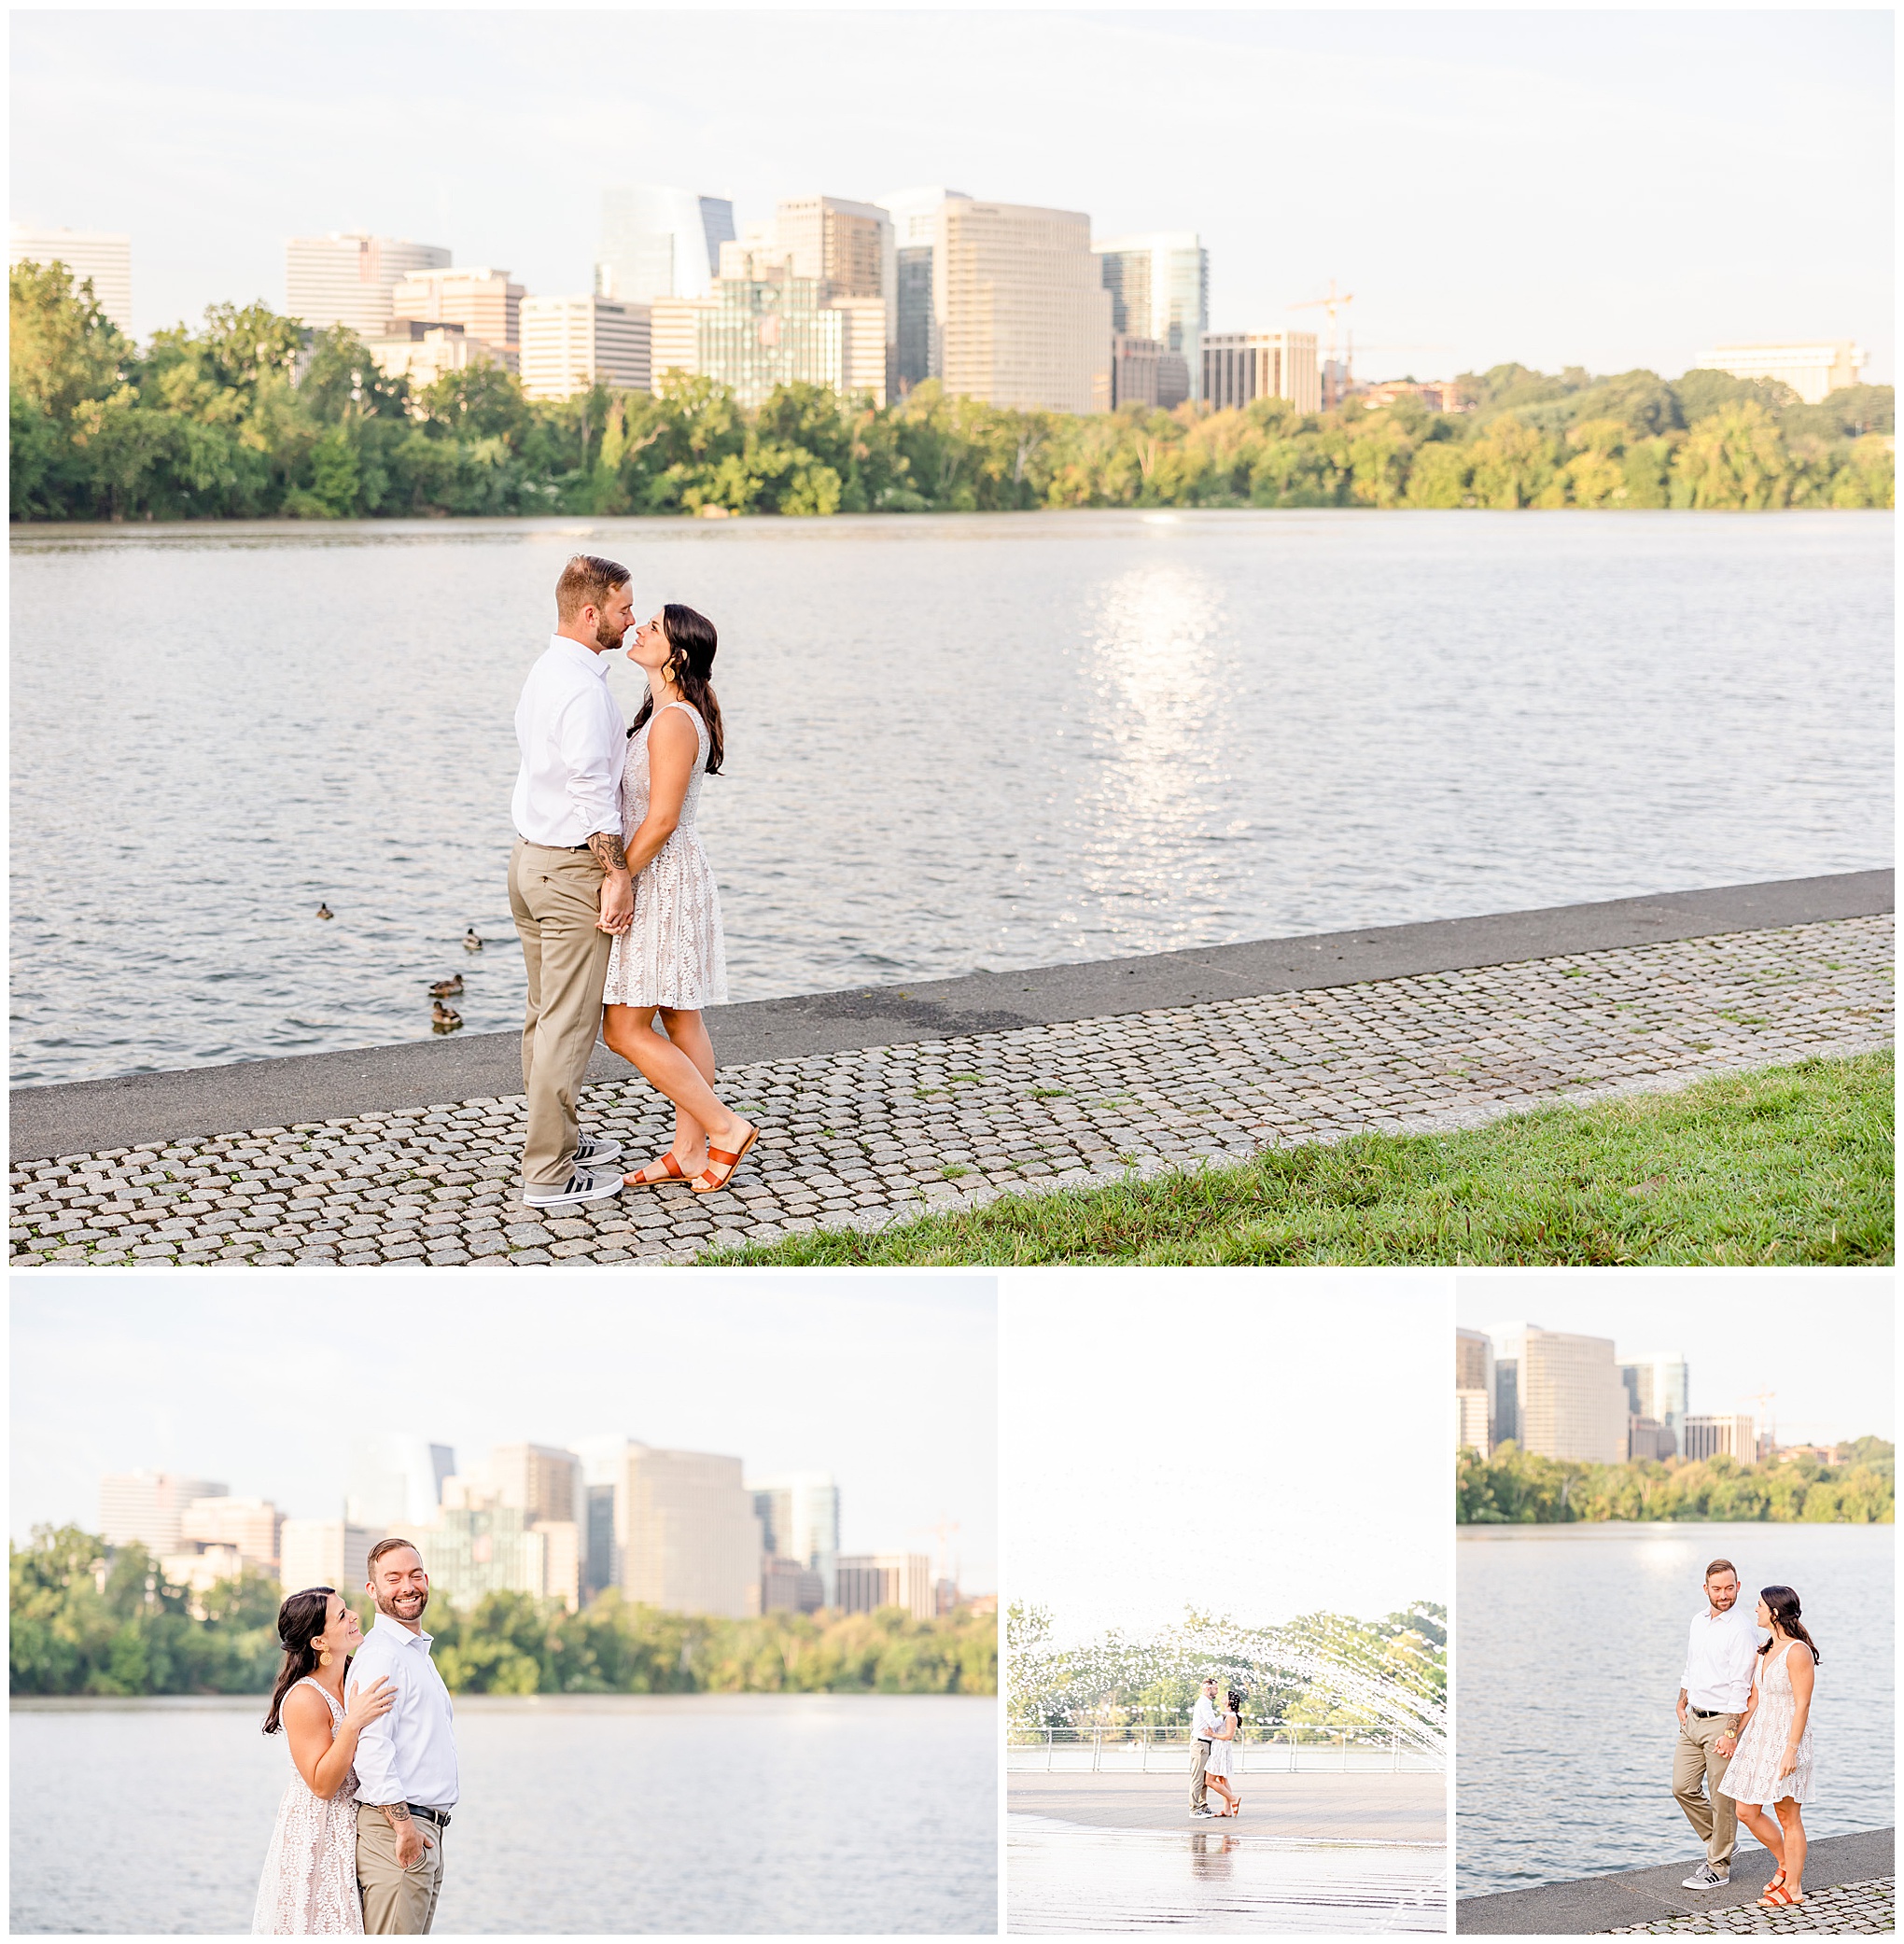 Georgetown waterfront engagement session, Georgetown engagement photos, Georgetown wedding photographer, DC wedding photographer, waterfront engagement photos, Georgetown waterfront engagement photos, DC engagement photos, Rachel E.H. Photography, summer engagement photos, couple in front of river, couple behind water fountain, woman hugging man from behind